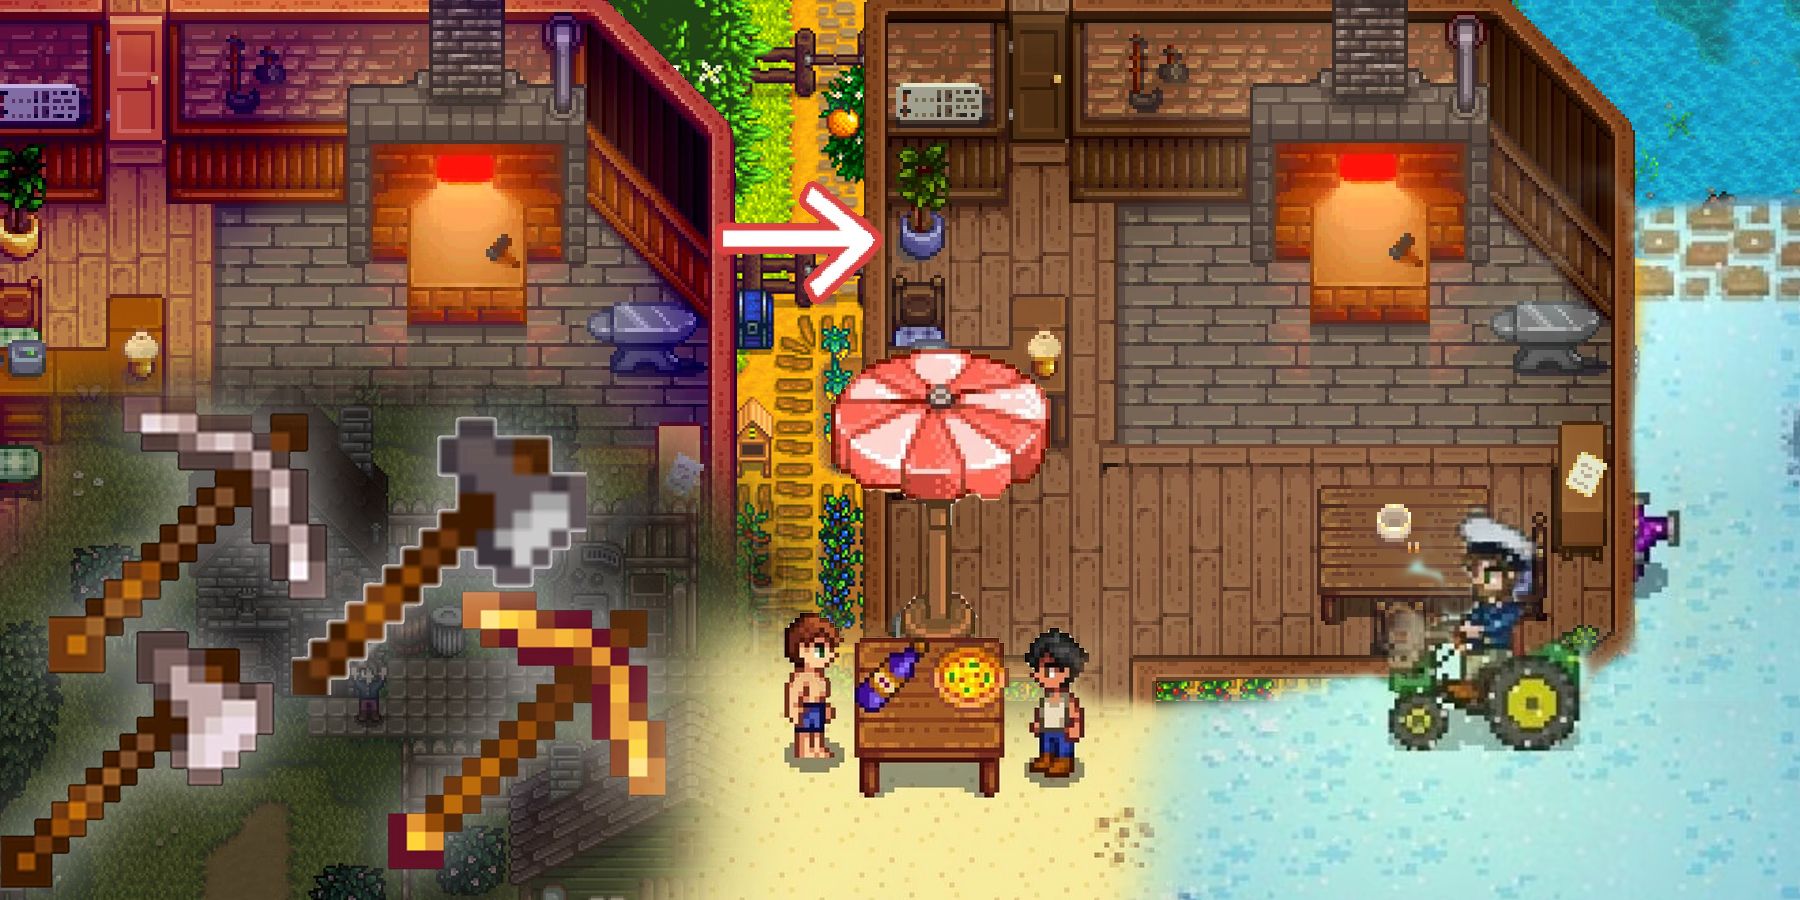 19-Stardew-Valley-Mods-That-Make-The-Game-Even-Better